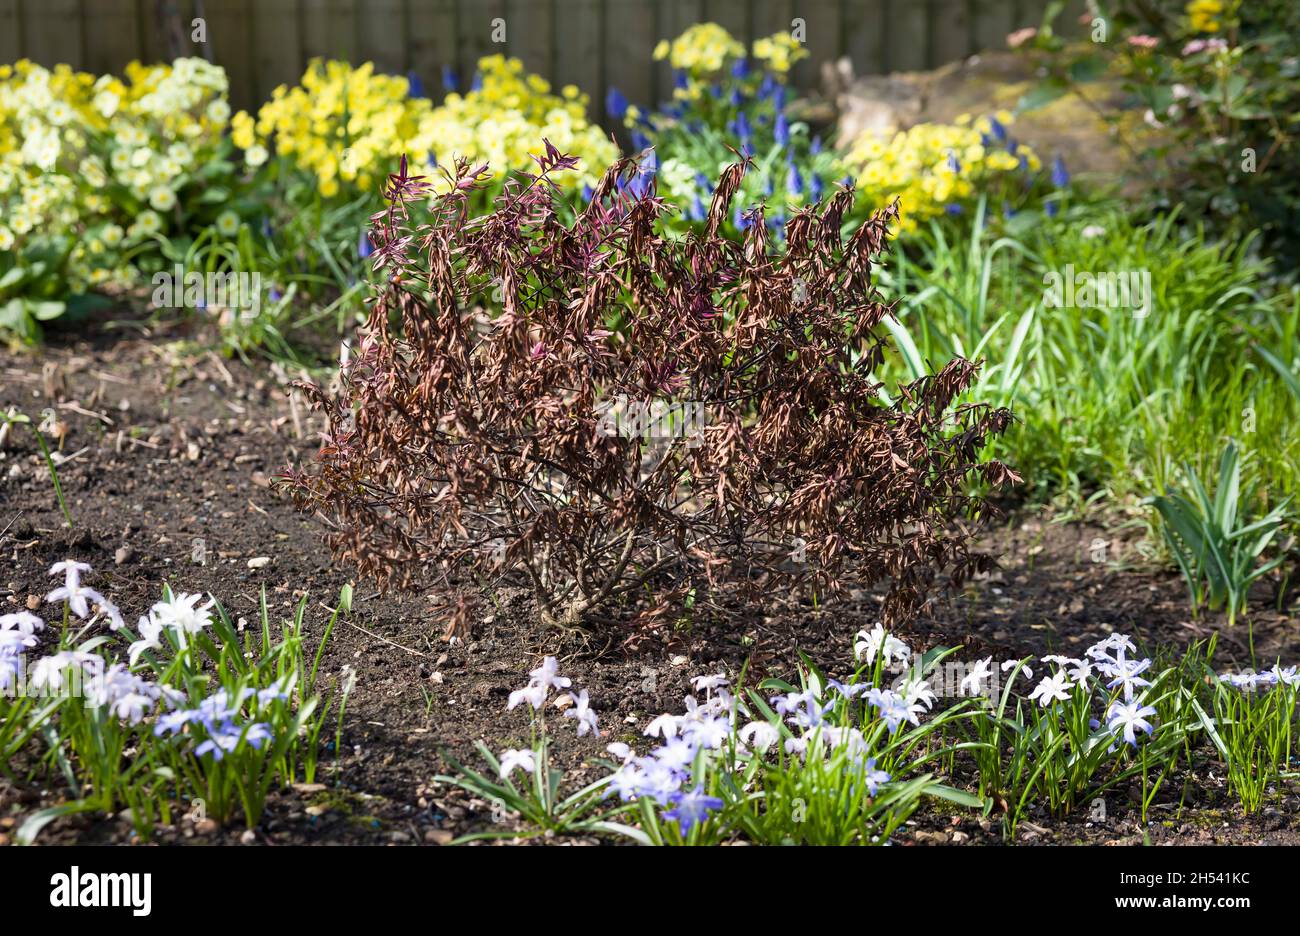 Frost damaged plant, dead hebe shrub in a flower bed in winter, UK garden Stock Photo